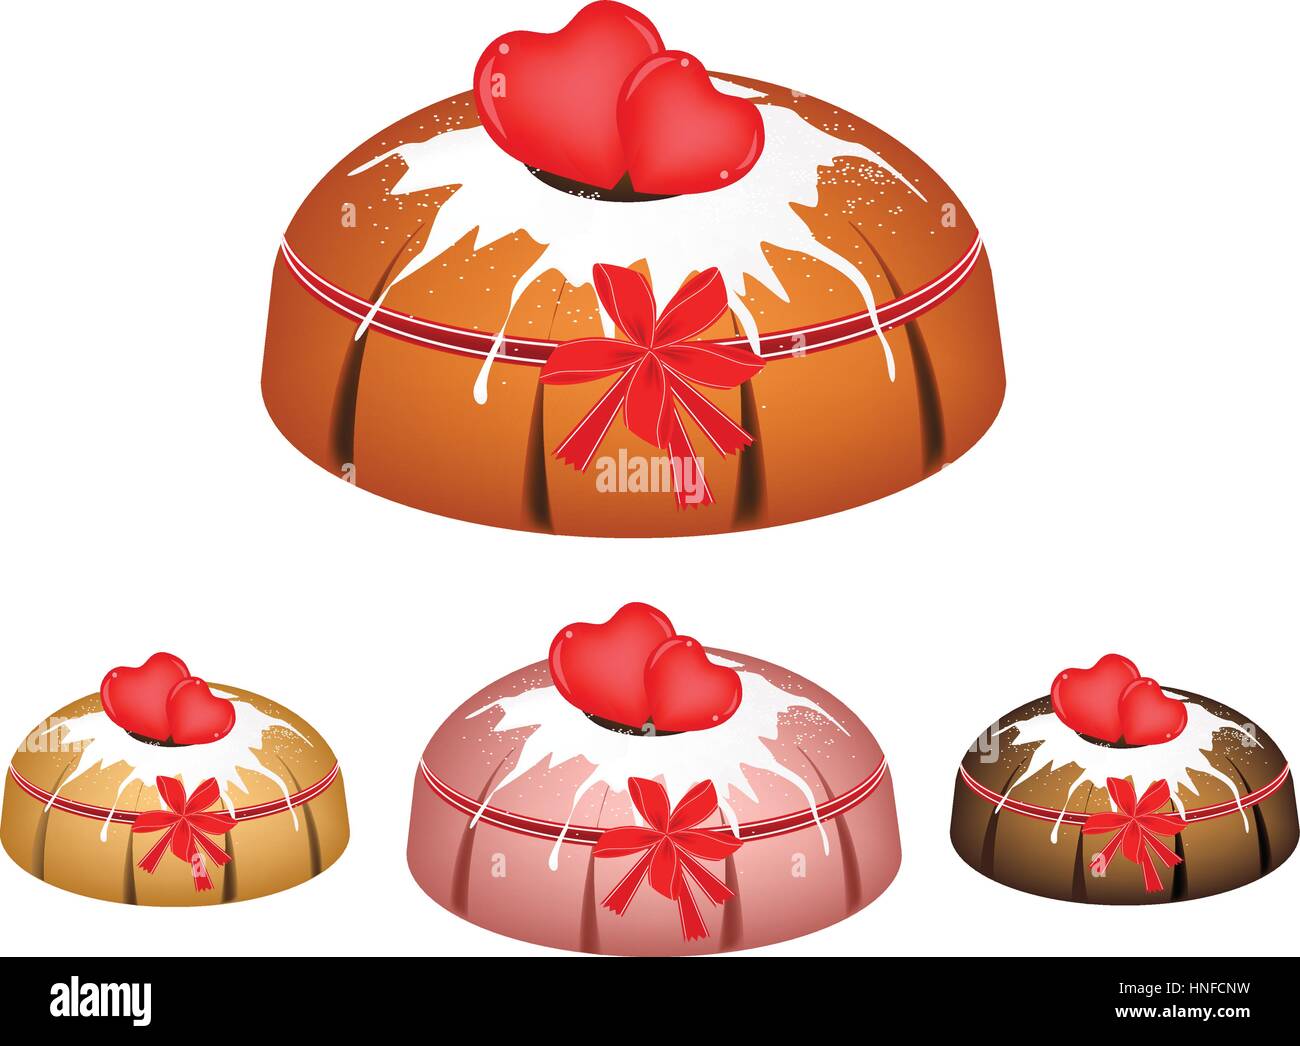 Illustration Set of Valentine Bundt Cake or Traditional Big Round Cake with Hole Inside, Mirror Glaze Coating and Two Heart Chocolate for Valentine De Stock Vector